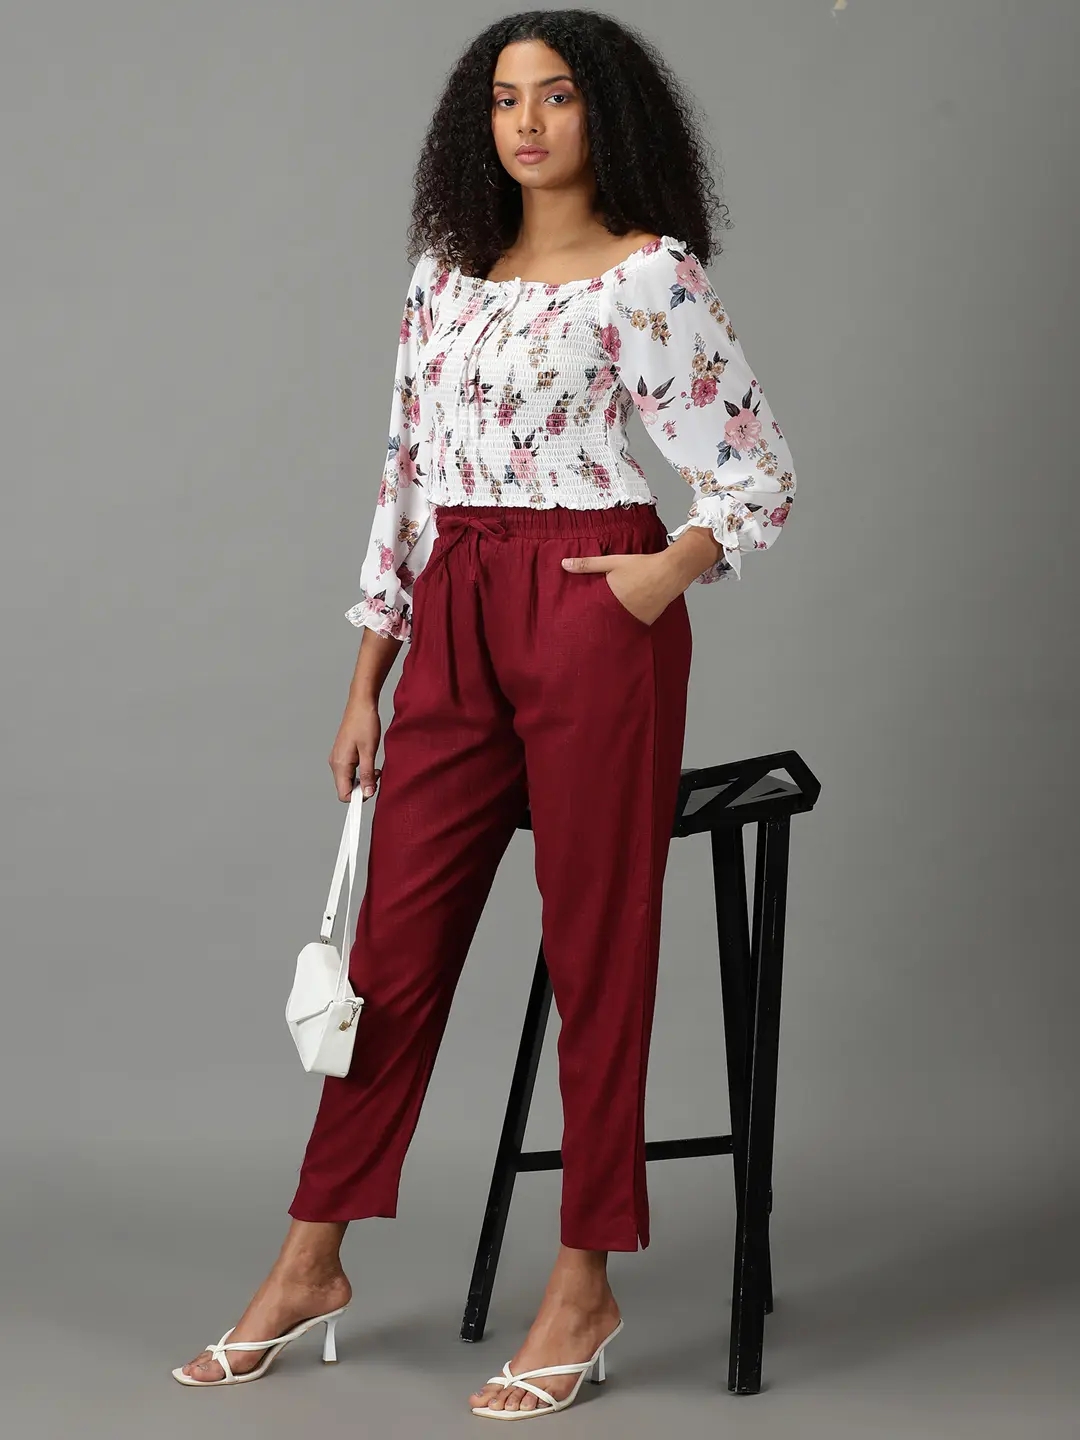 Cigarette trousers outfit ideas